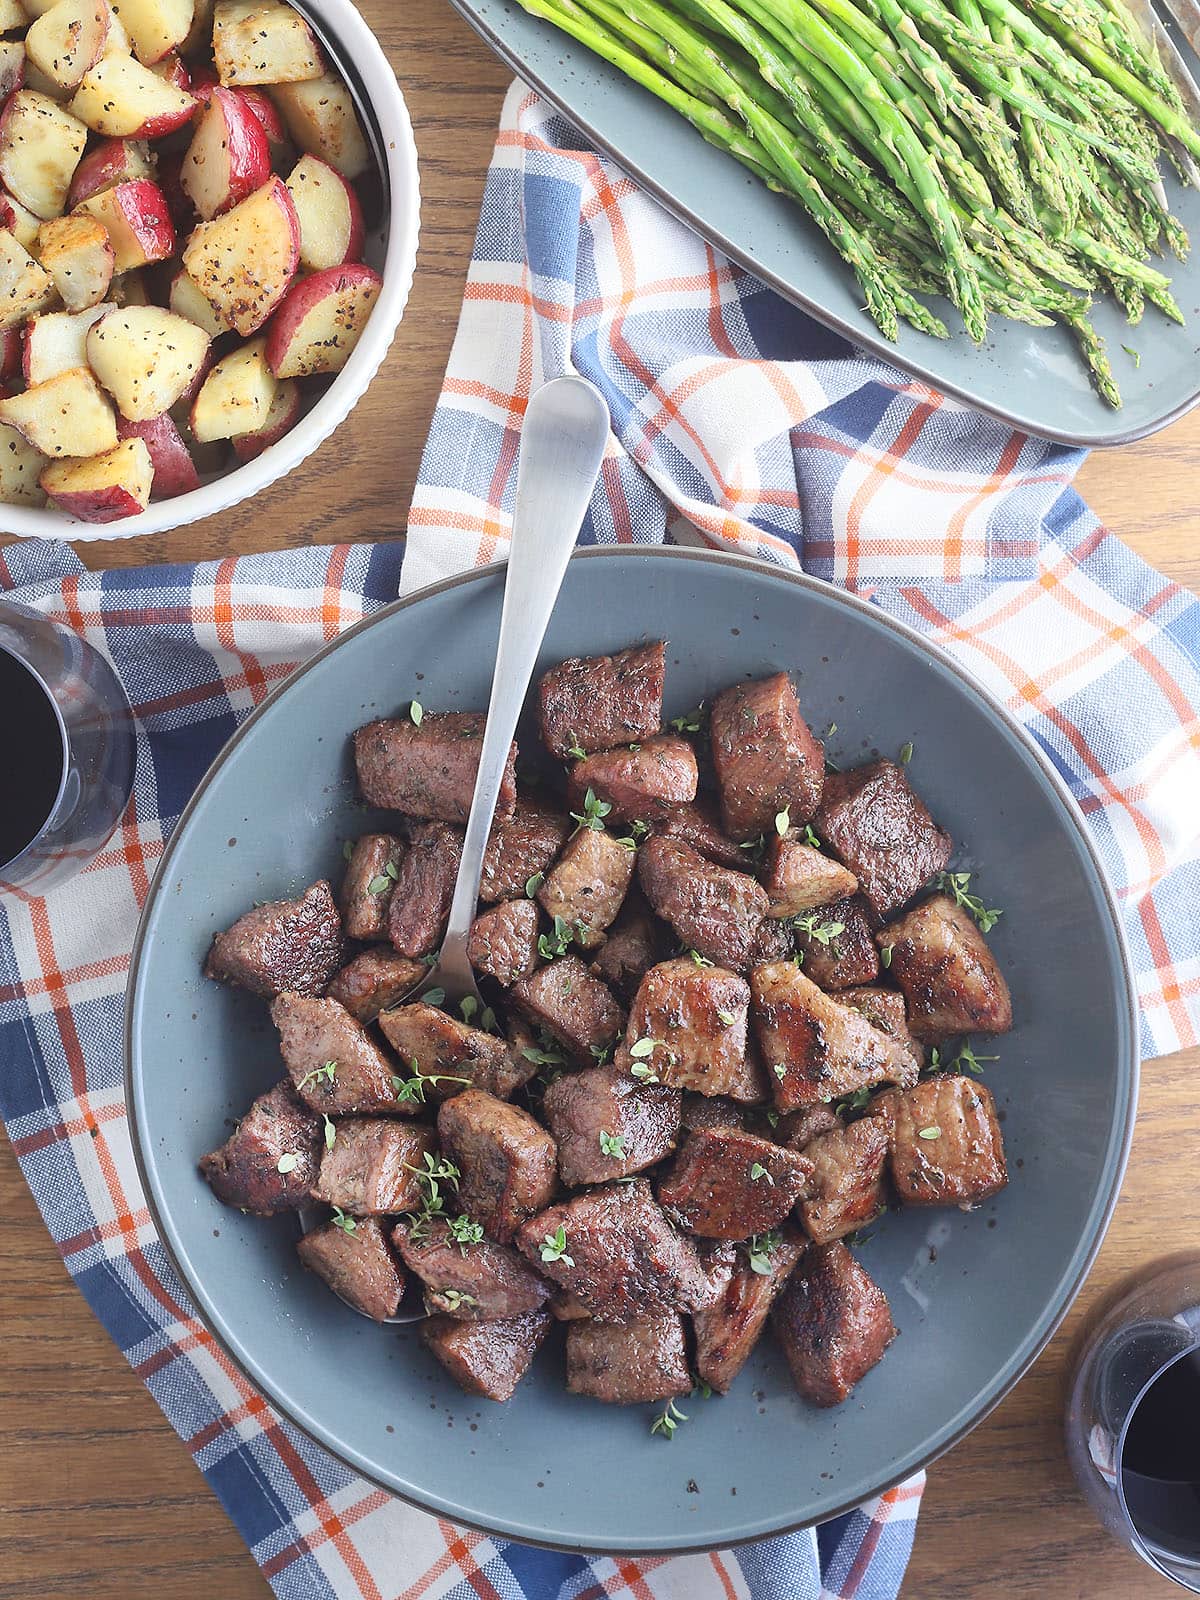 Serving dish of air fryer steak tips with a bowl of roasted potatoes, glass of wine and a platter of asparagus on the side.